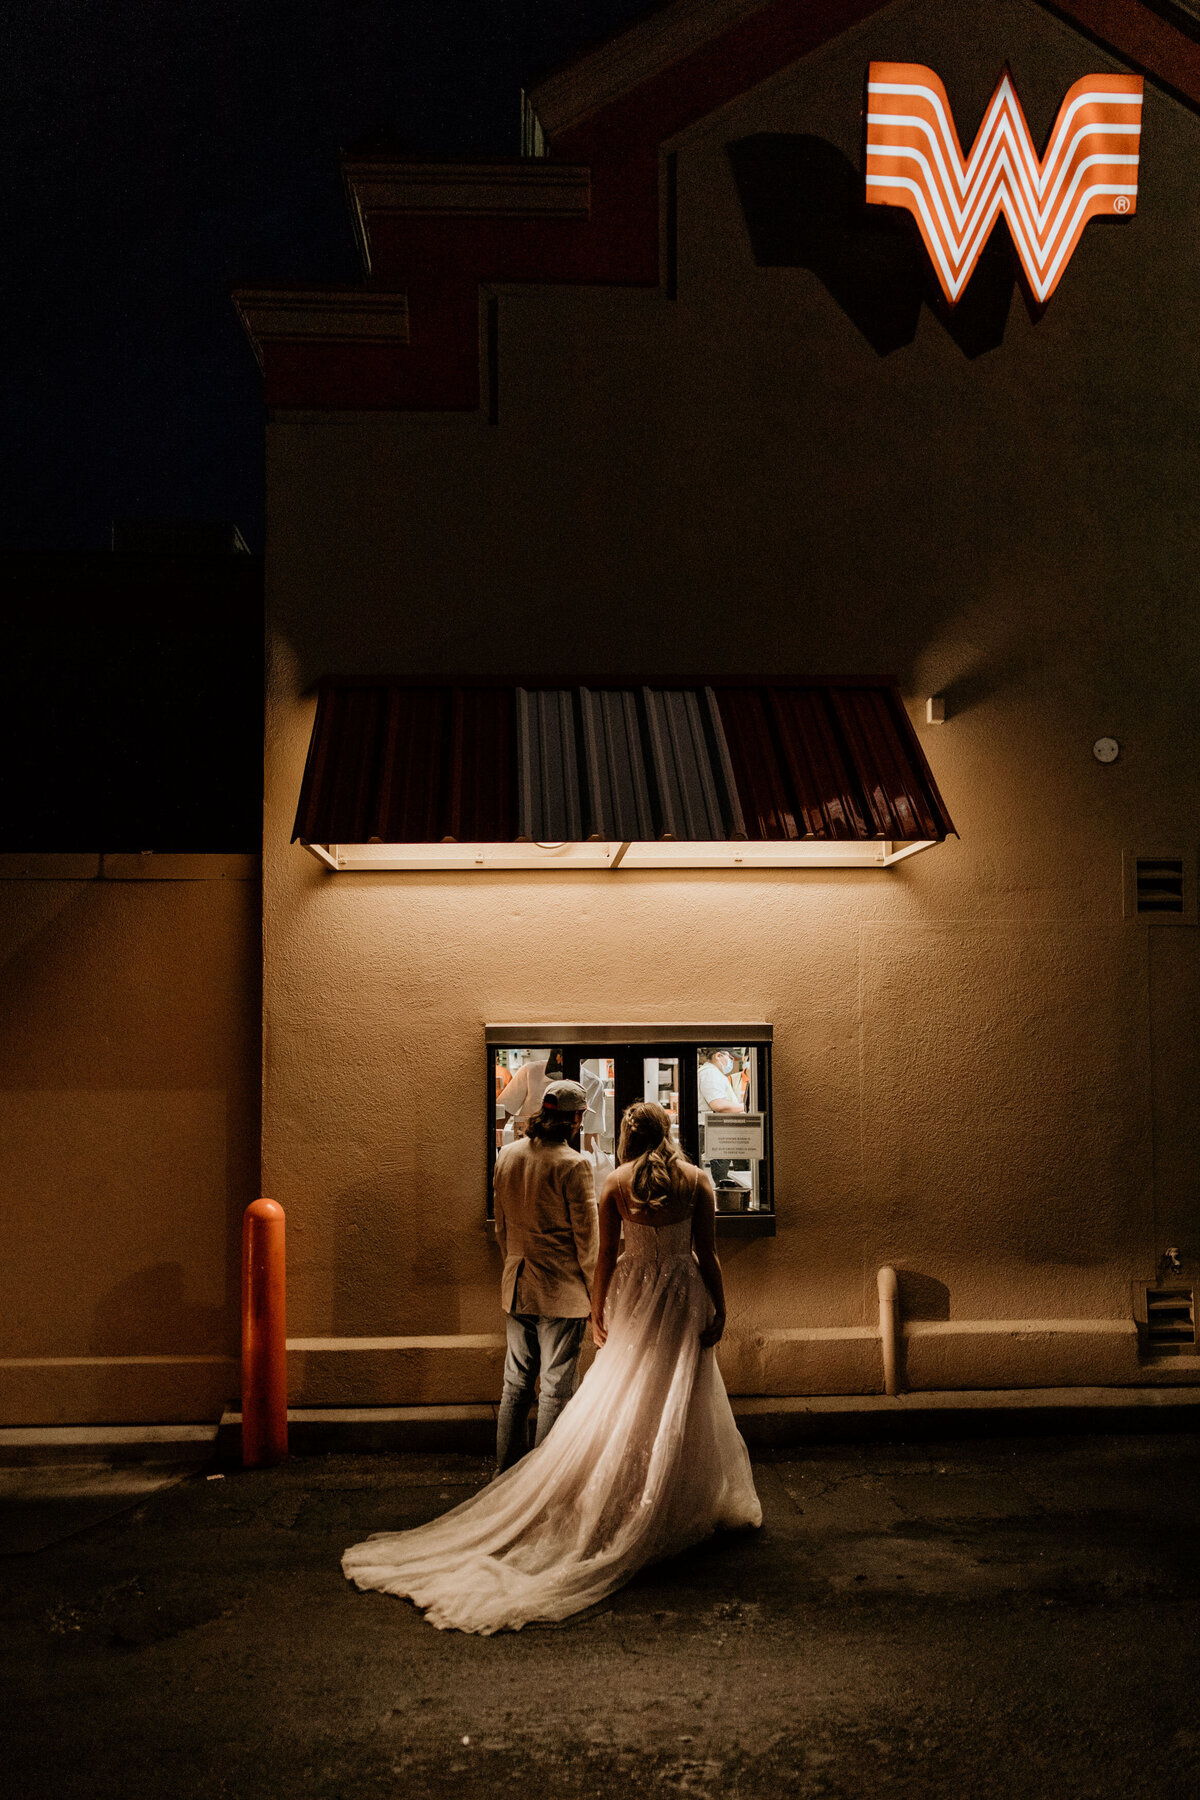 bride and groom ordering food in wedding attire at Whataburger drive thru